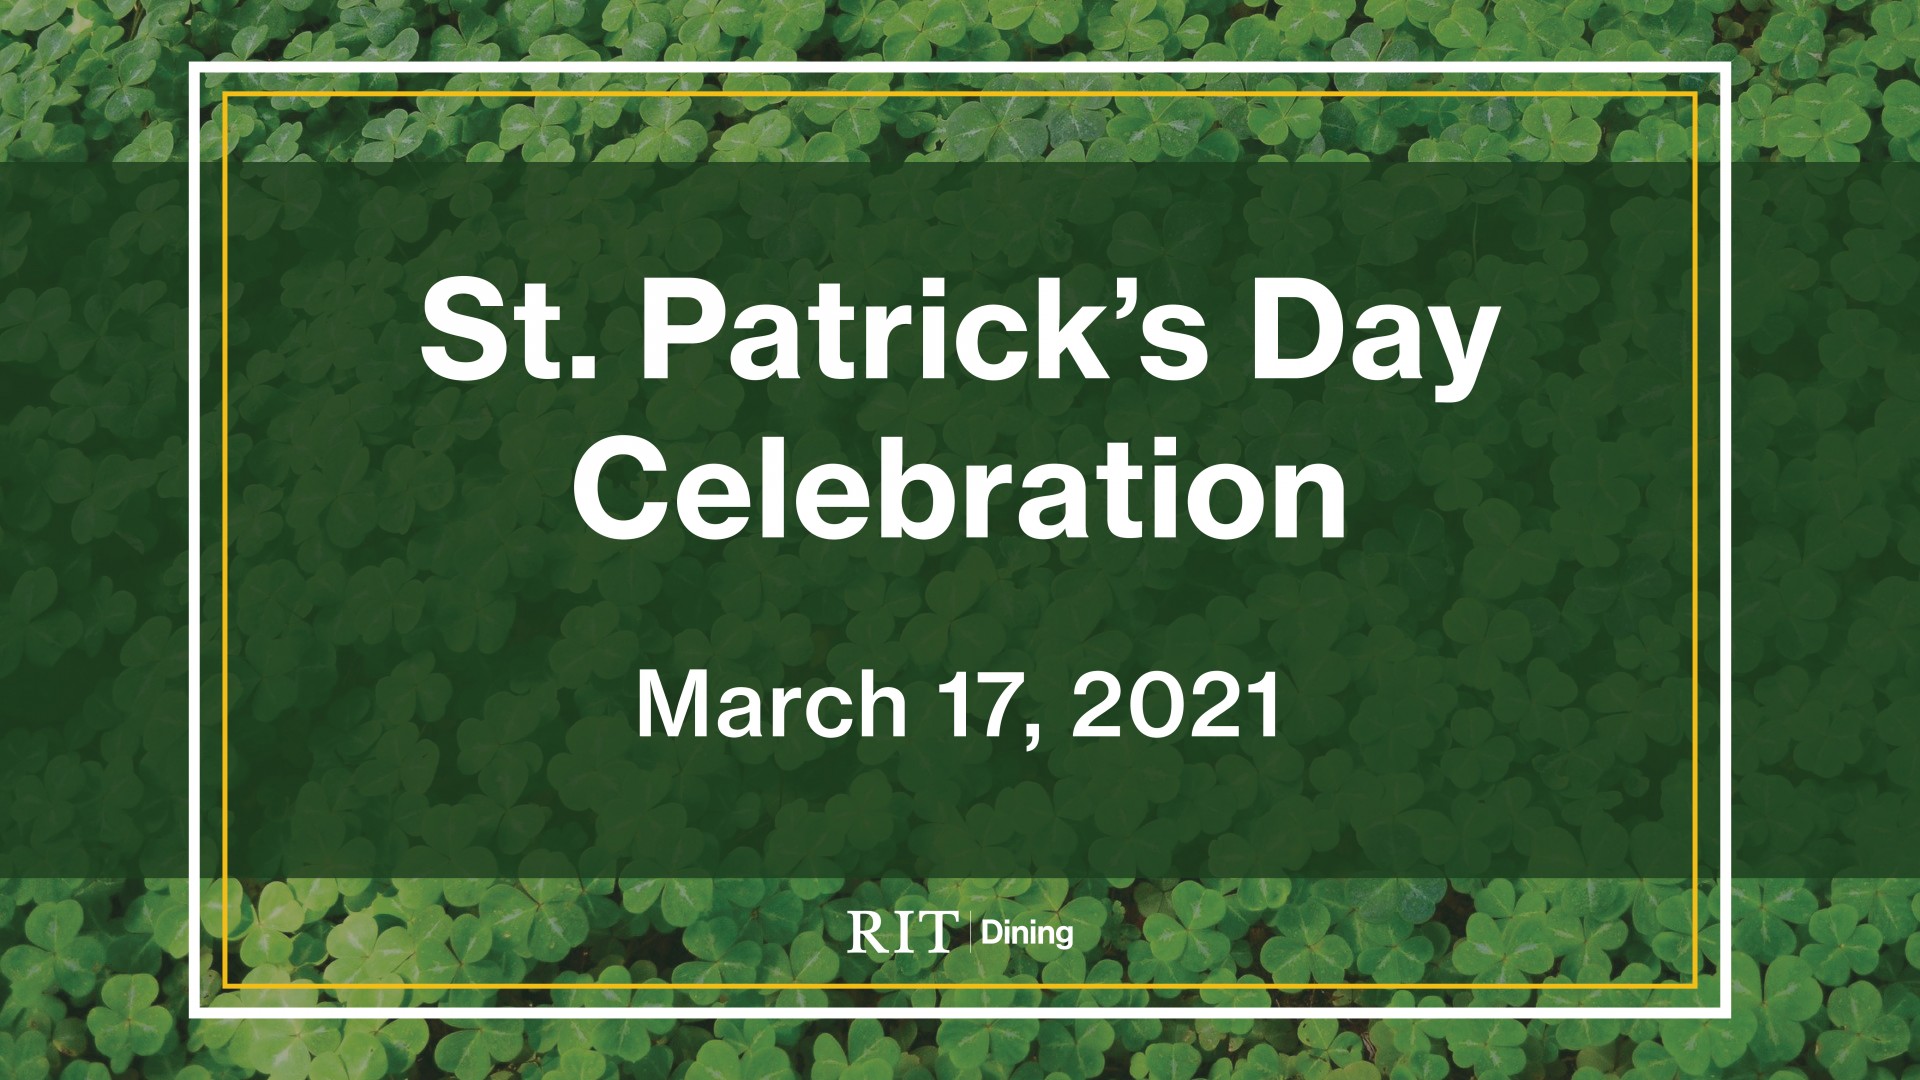 shamrock graphic background with RIT Dining logo and "St. Patrick's Day Celebration March 17, 2021"